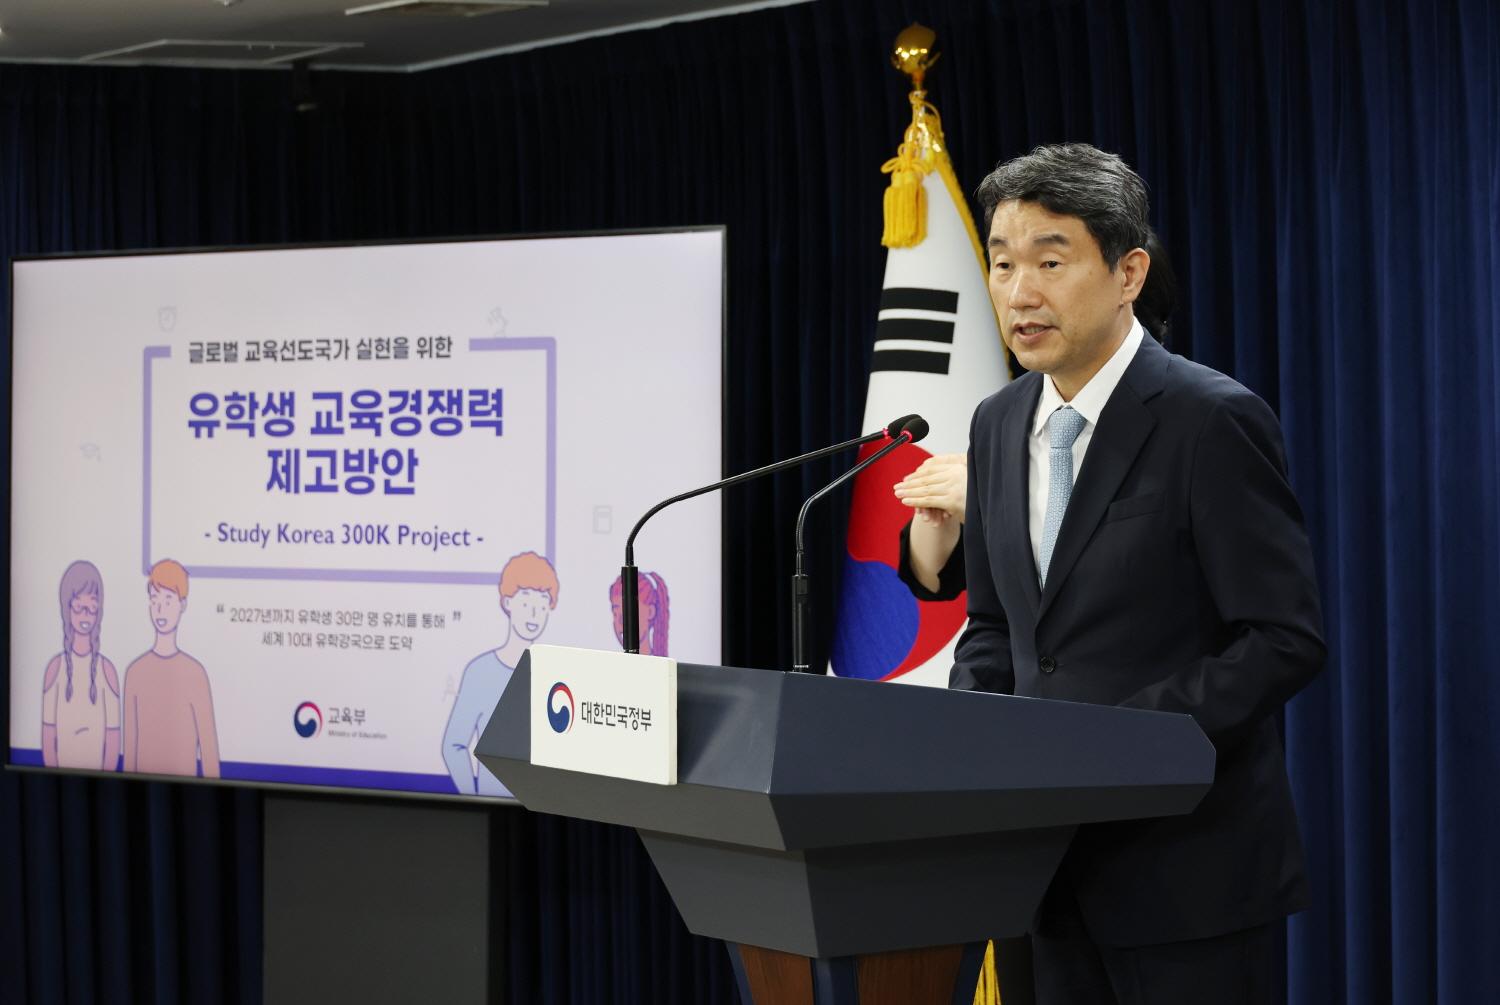 Ministry of Education Announces Study Korea 300K Project (1)